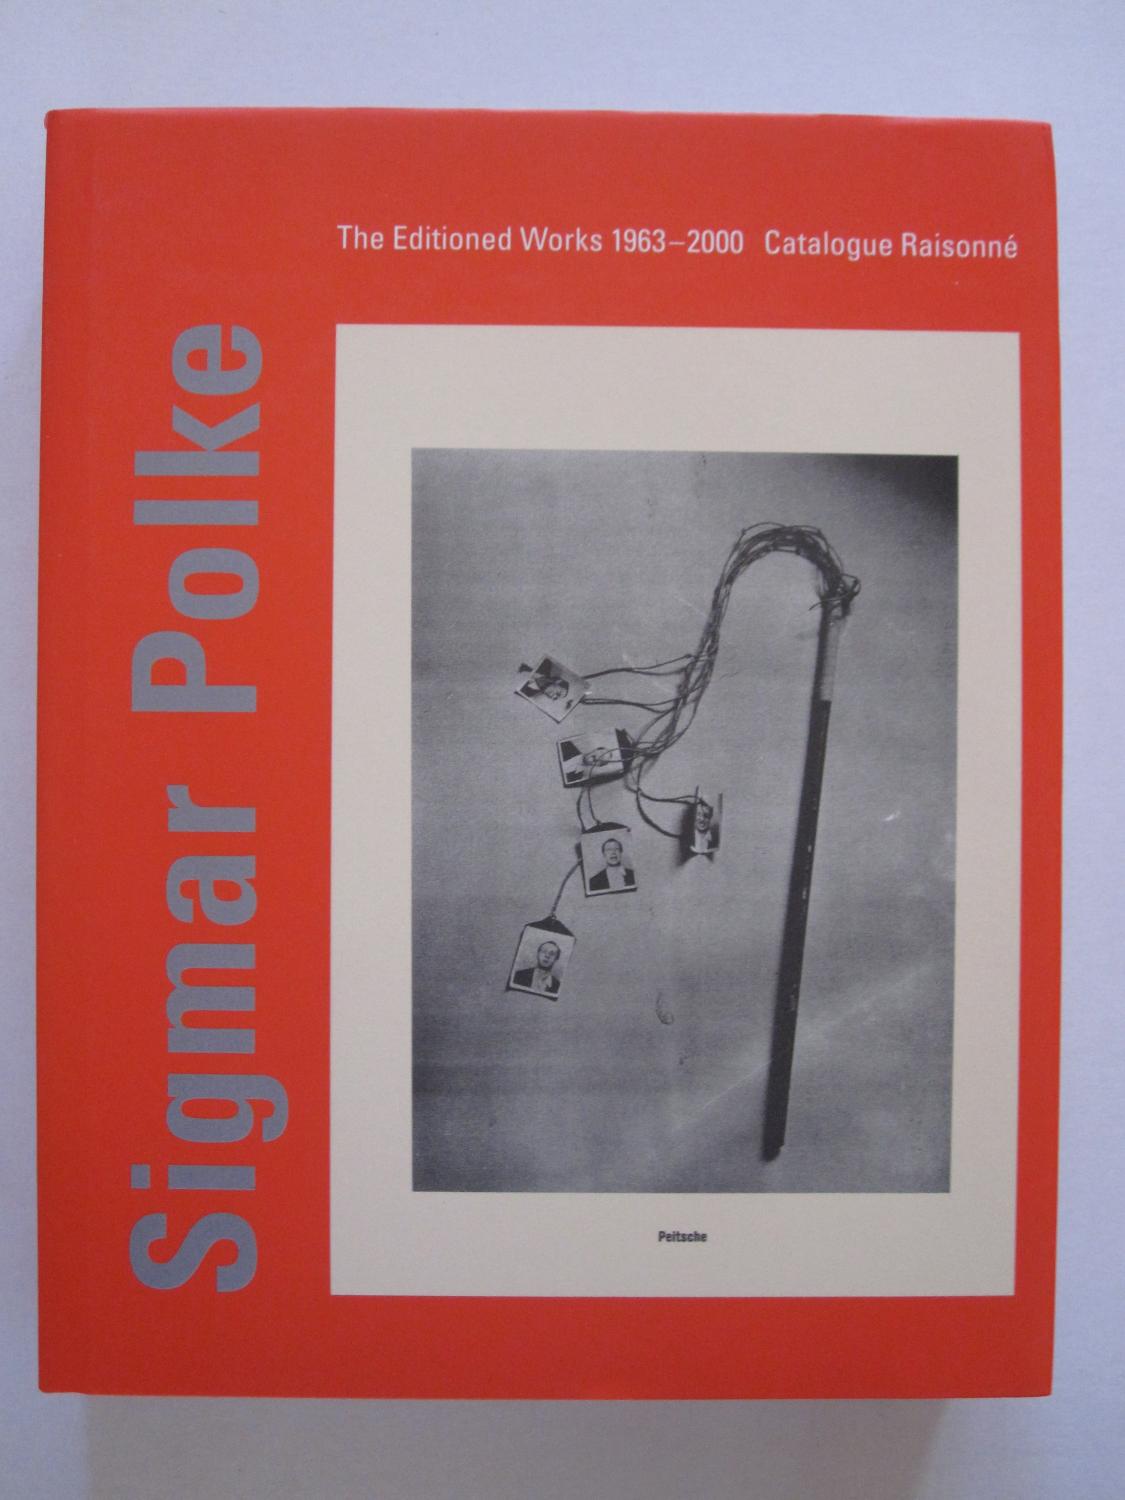 Sigmar Polke - The Editioned Works 1963-2000 Catalogue Raisonne